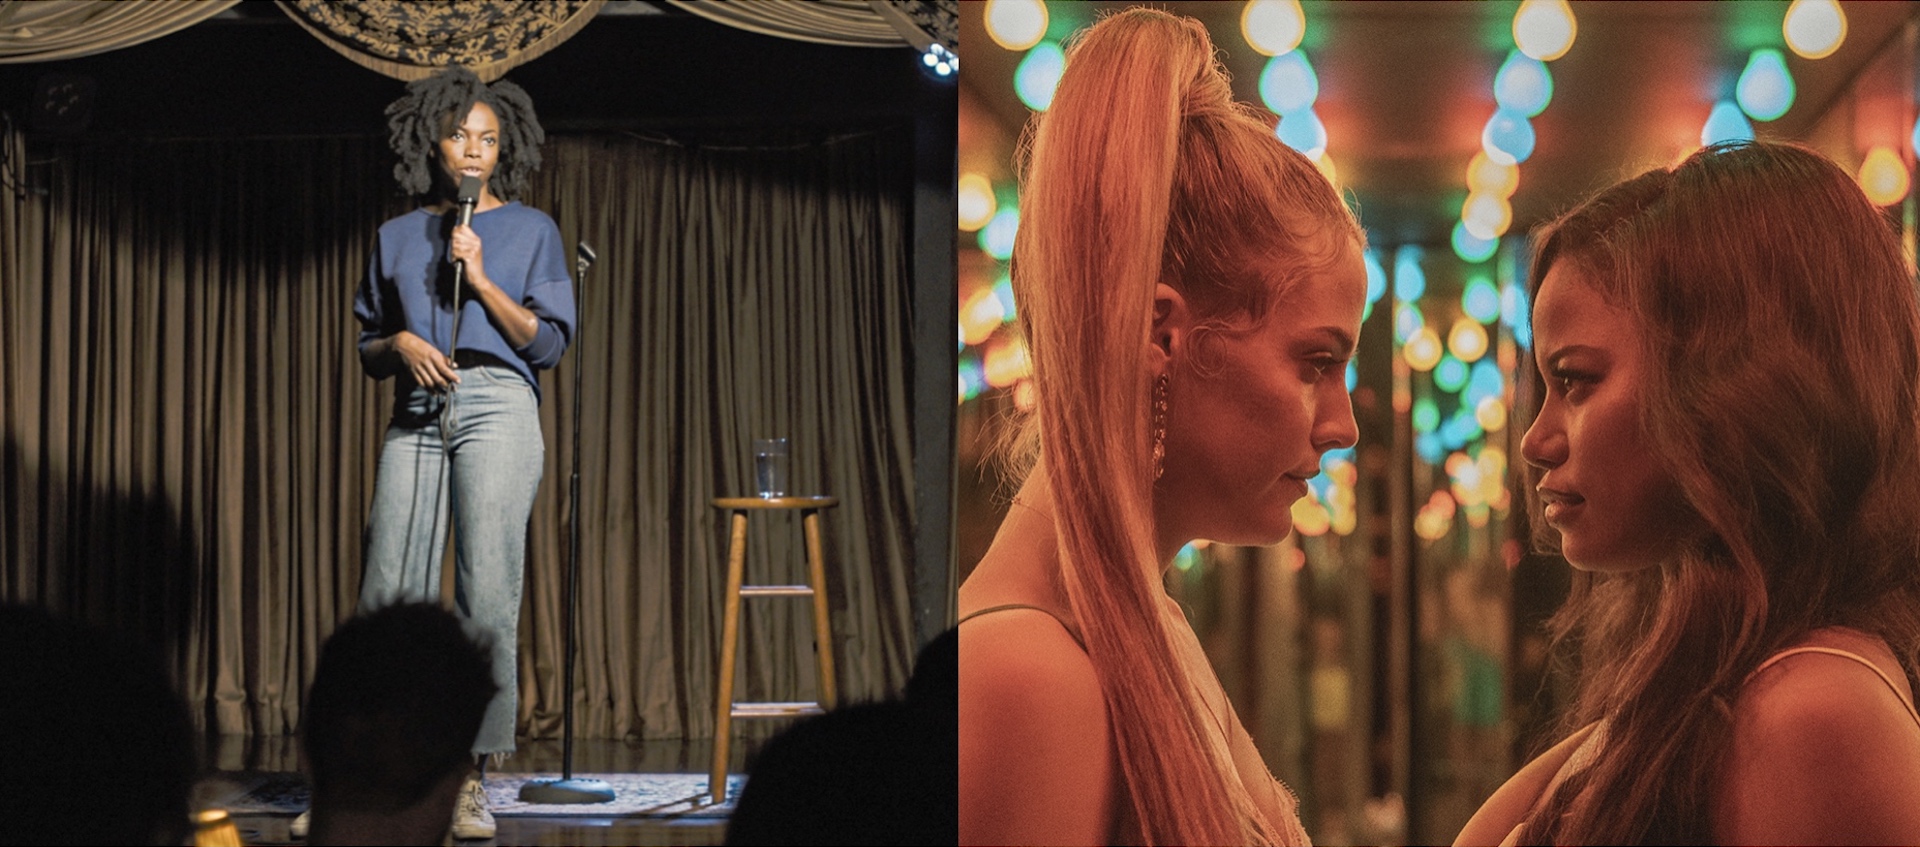 Side-by-side stills from the films The Weekend and Zola